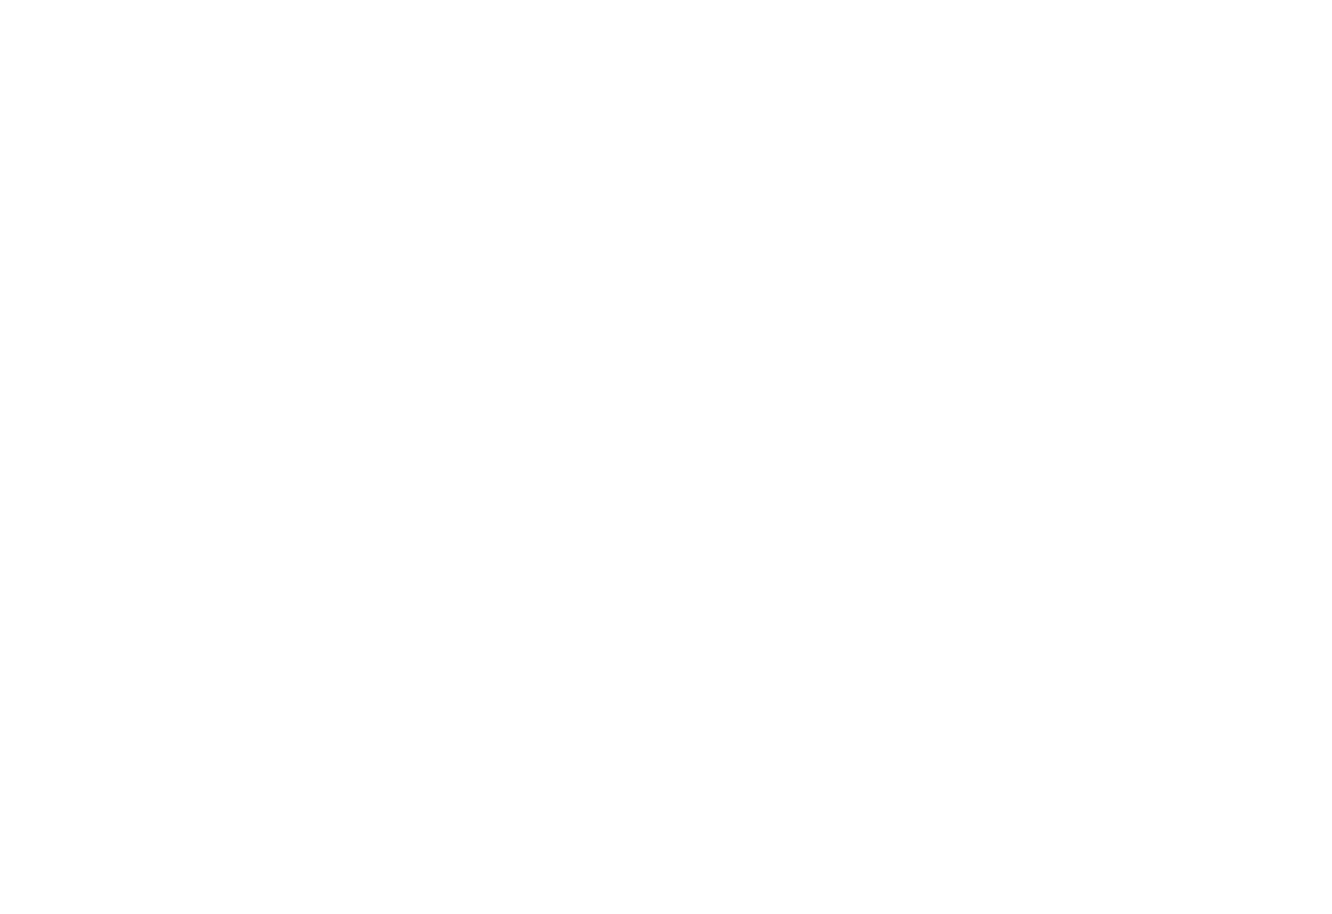 The line render of the Flat Top Trailer with full accessories including a headboard, drawbar toolbox, and hi-volume extender dropsides.